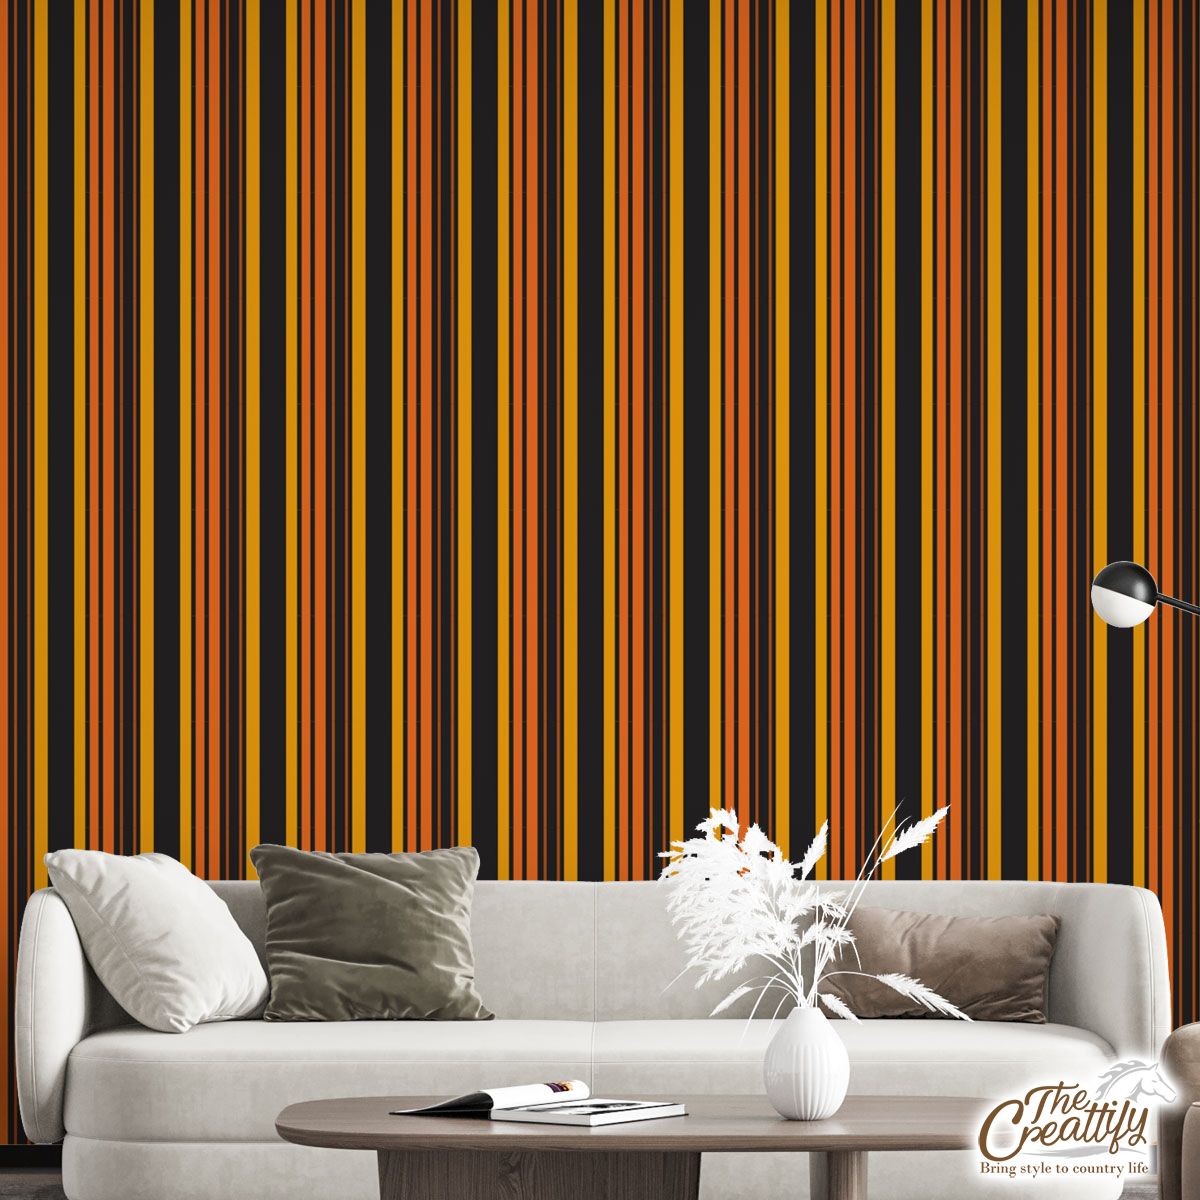 Yellow And Orange Stripes In Halloween Theme Wall Mural